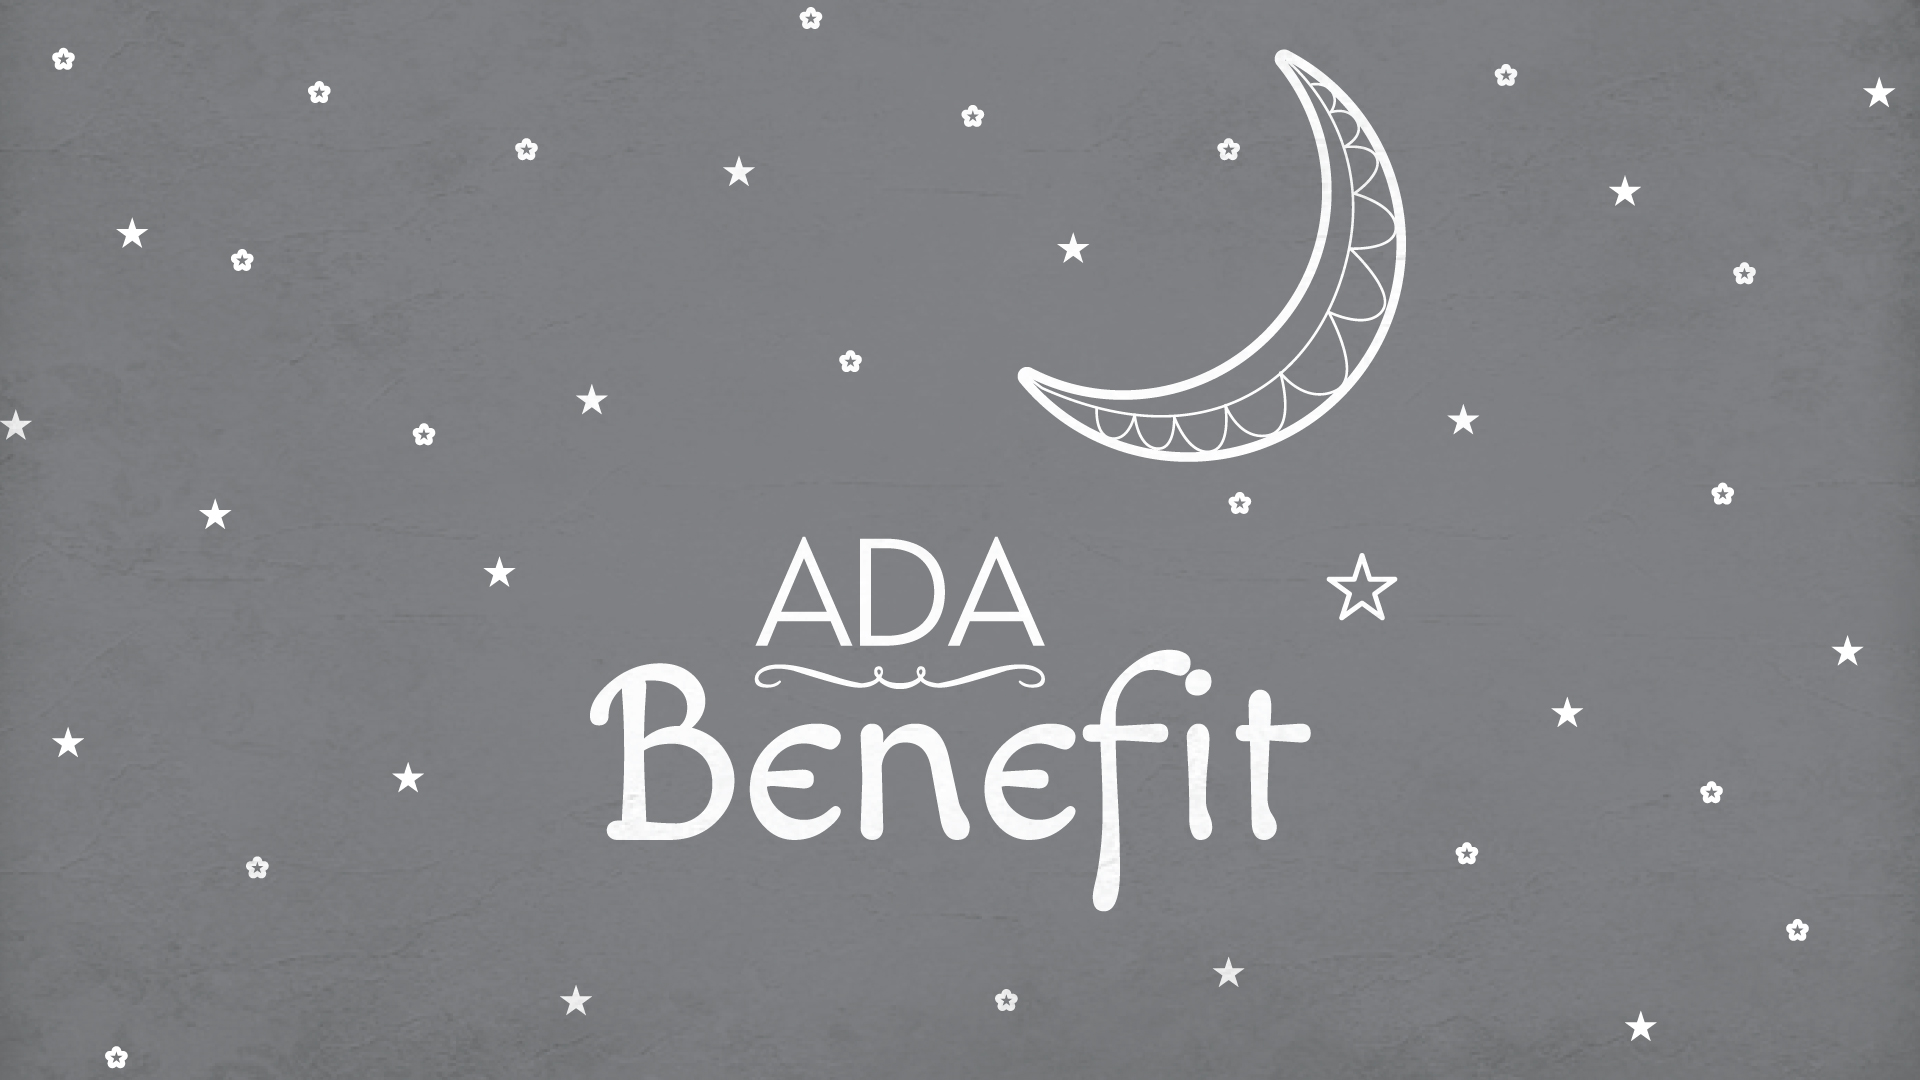 gray grunge background with white stars and moon, white text, "ADA Benefit."